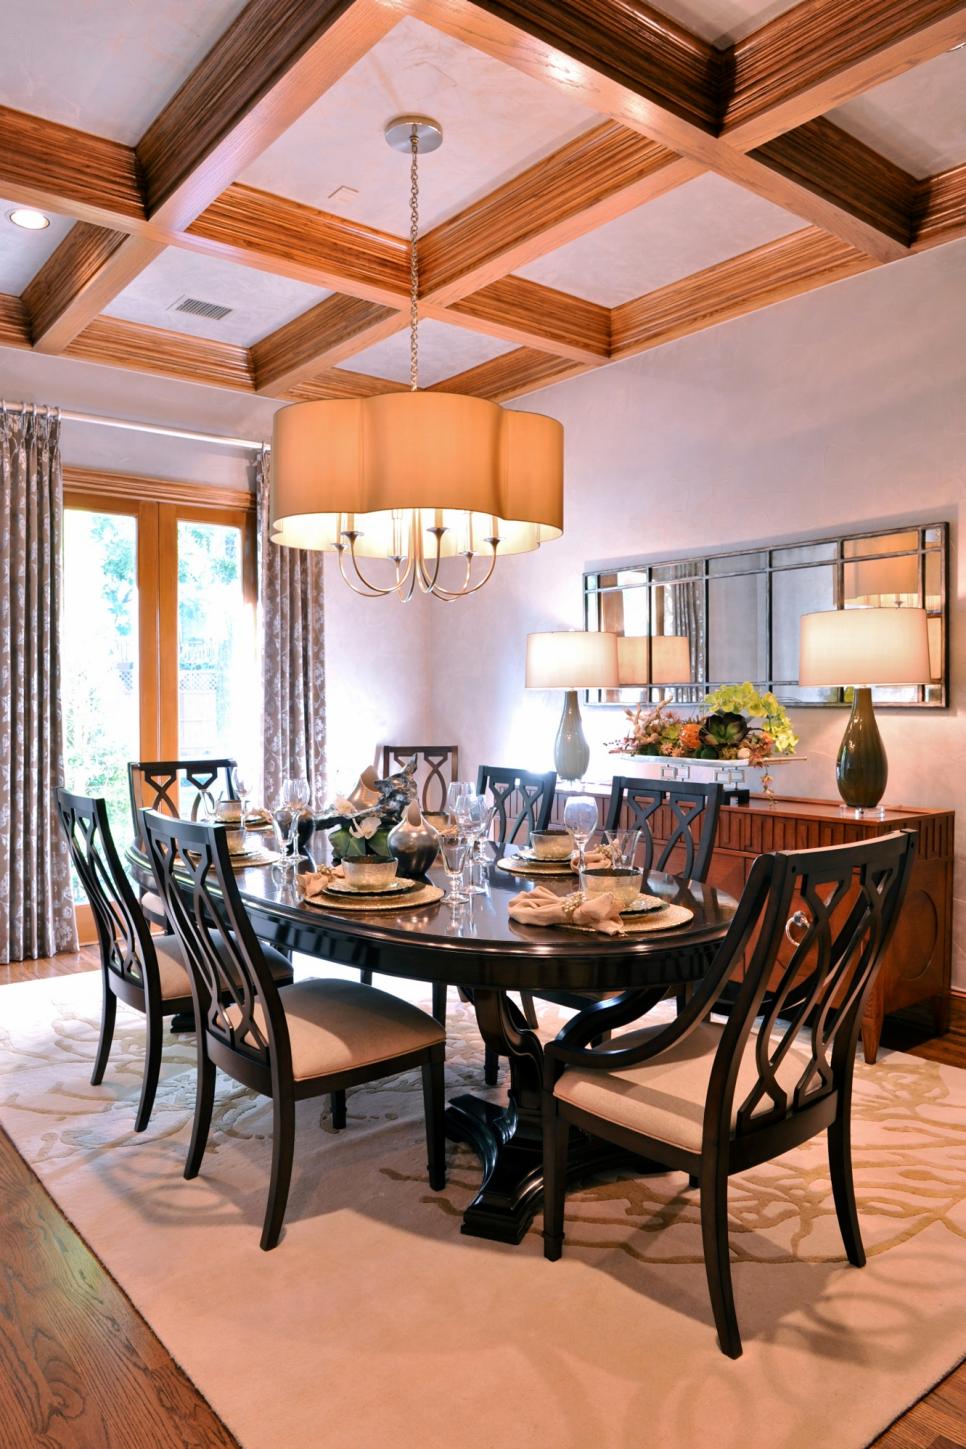 Transitional Dining Room With Oval Table | HGTV